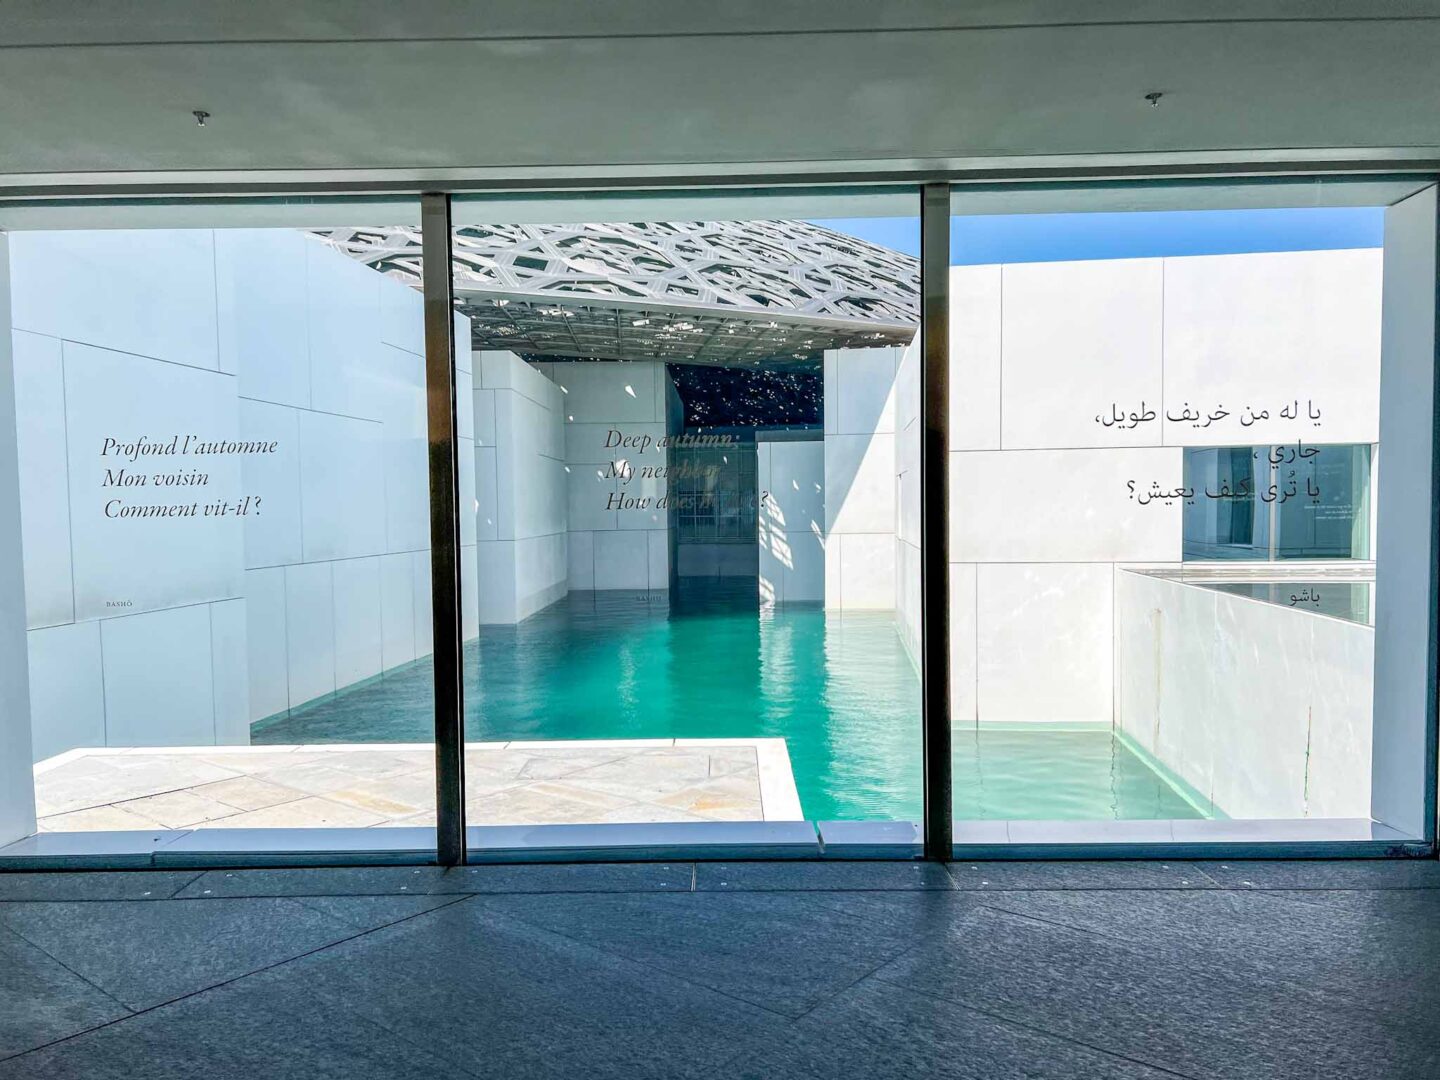 Things to do in Abu Dhabi, inside The Louvre with water around the museum